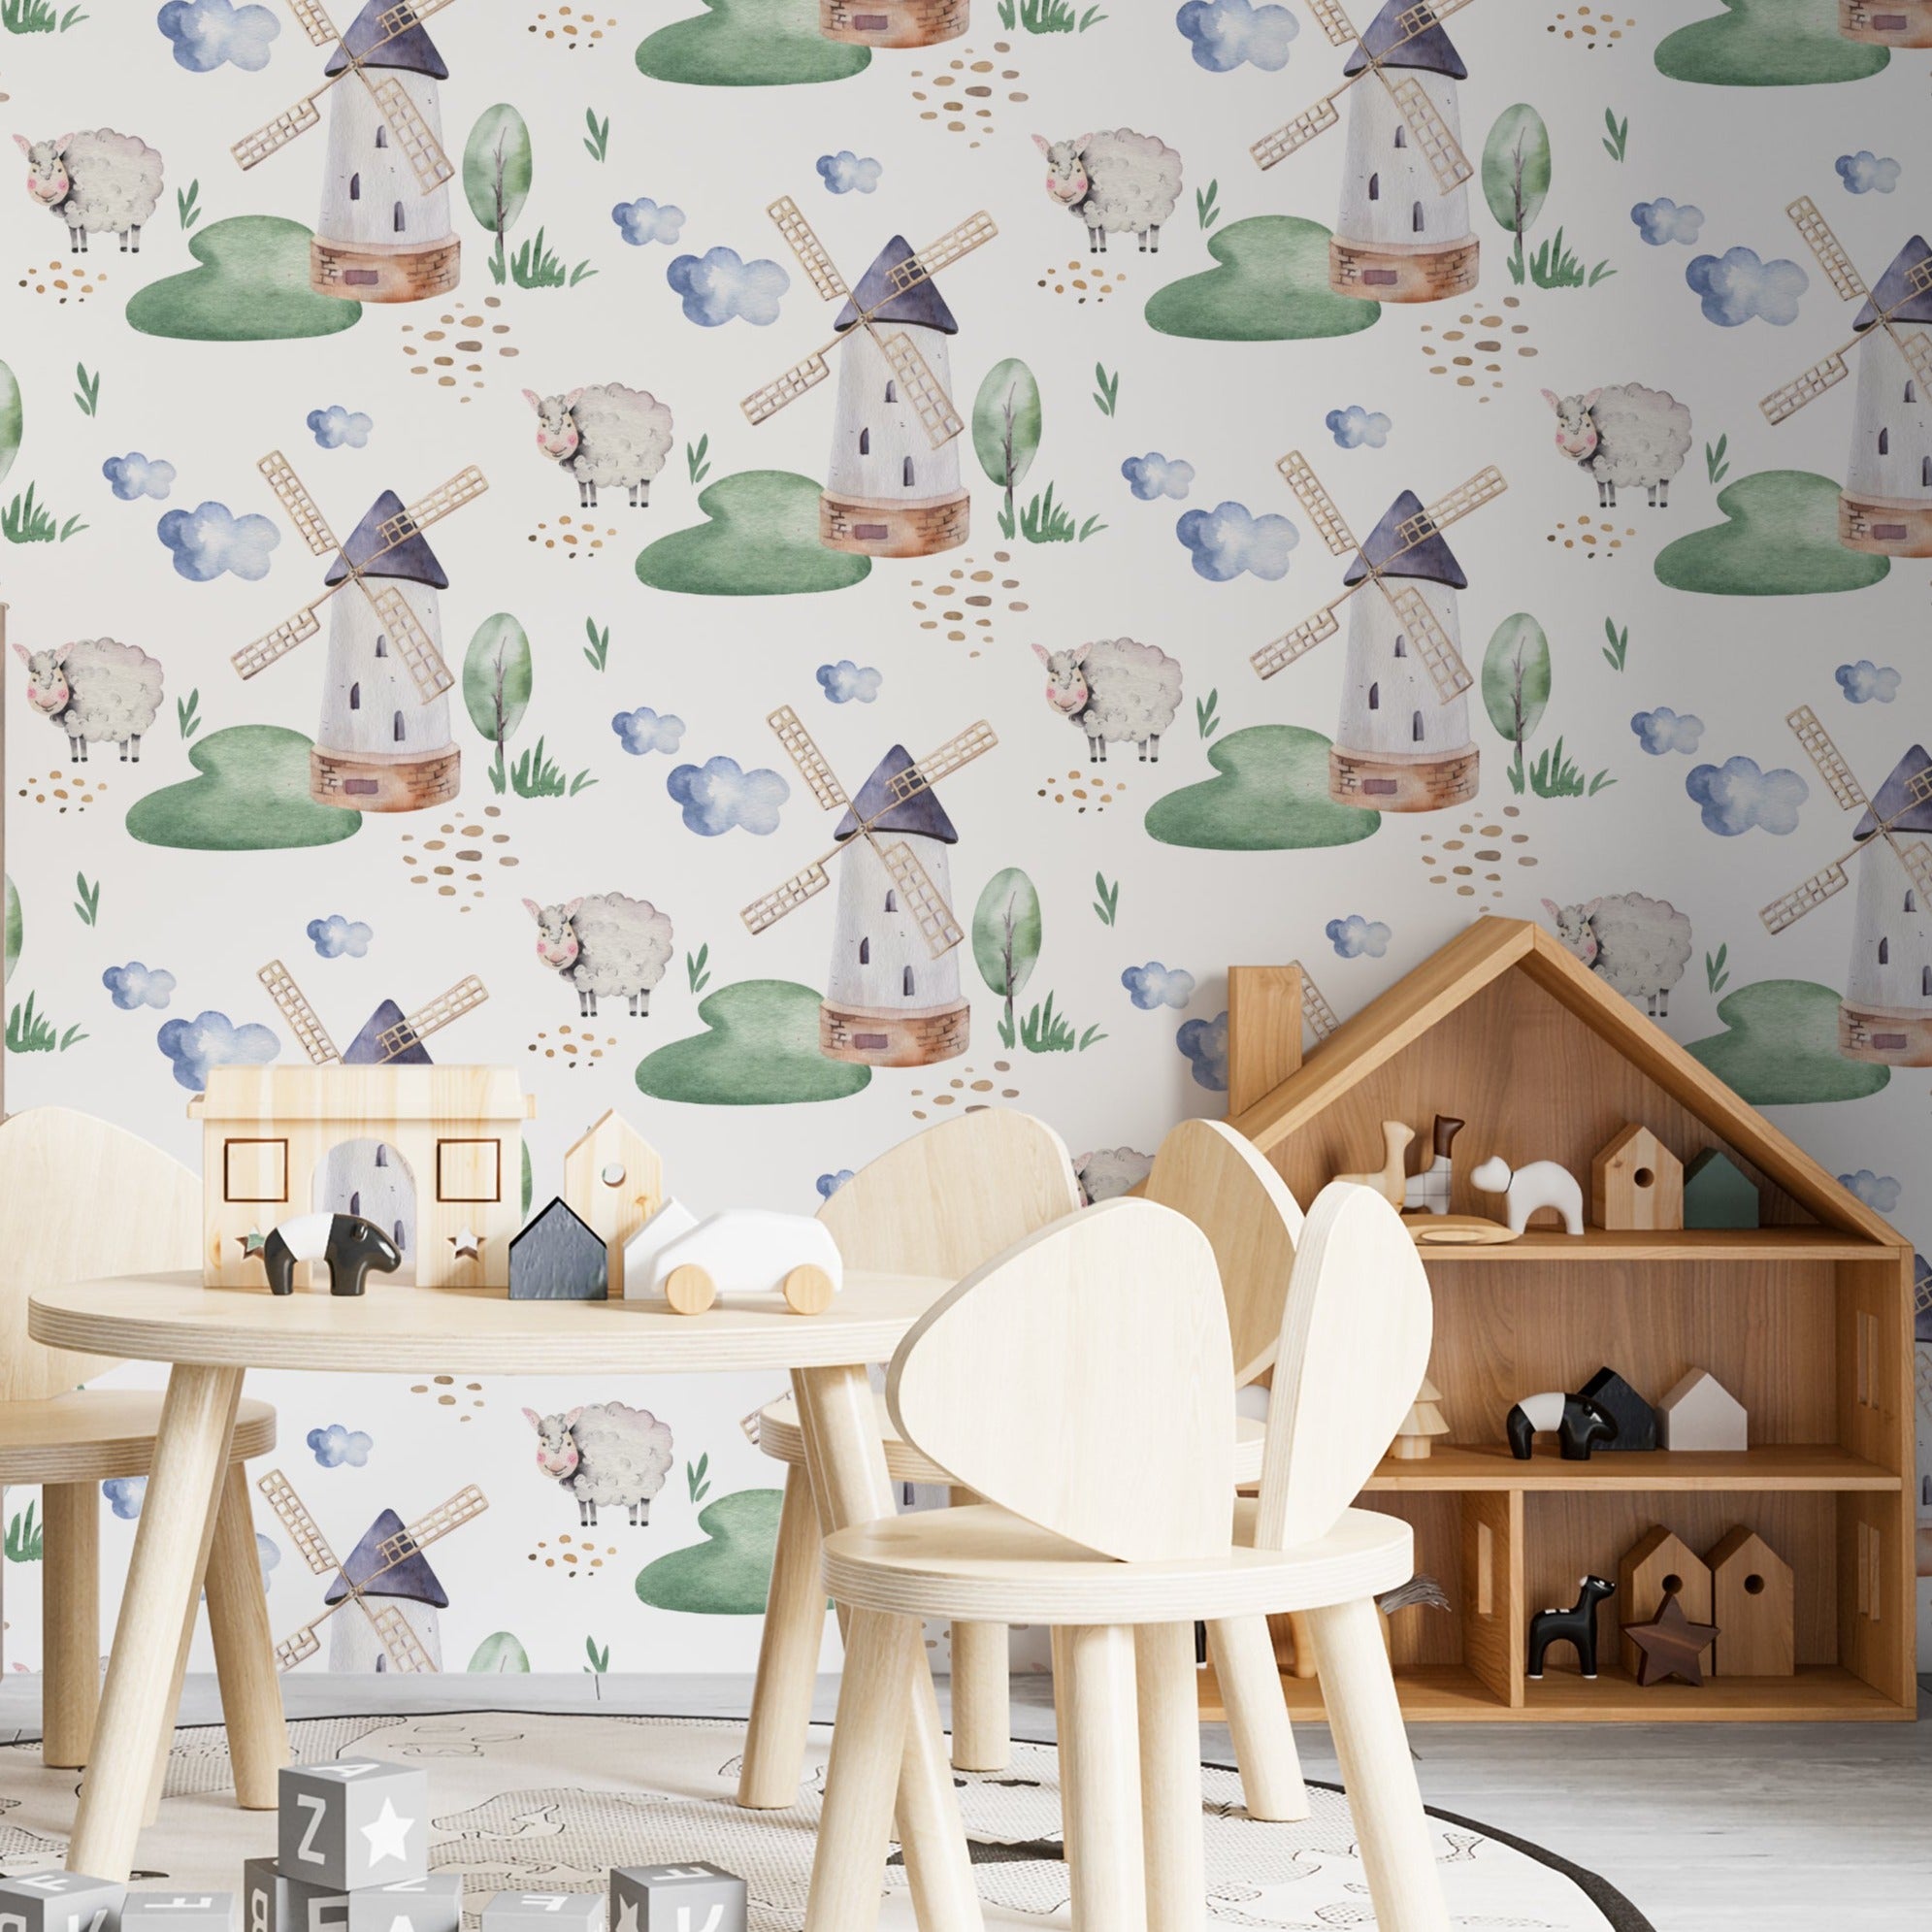 Children's playroom decorated with Watercolor Farm Animals IV wallpaper, showing a pattern of windmills, sheep, and soft natural elements, complemented by wooden children's furniture and playful decor.